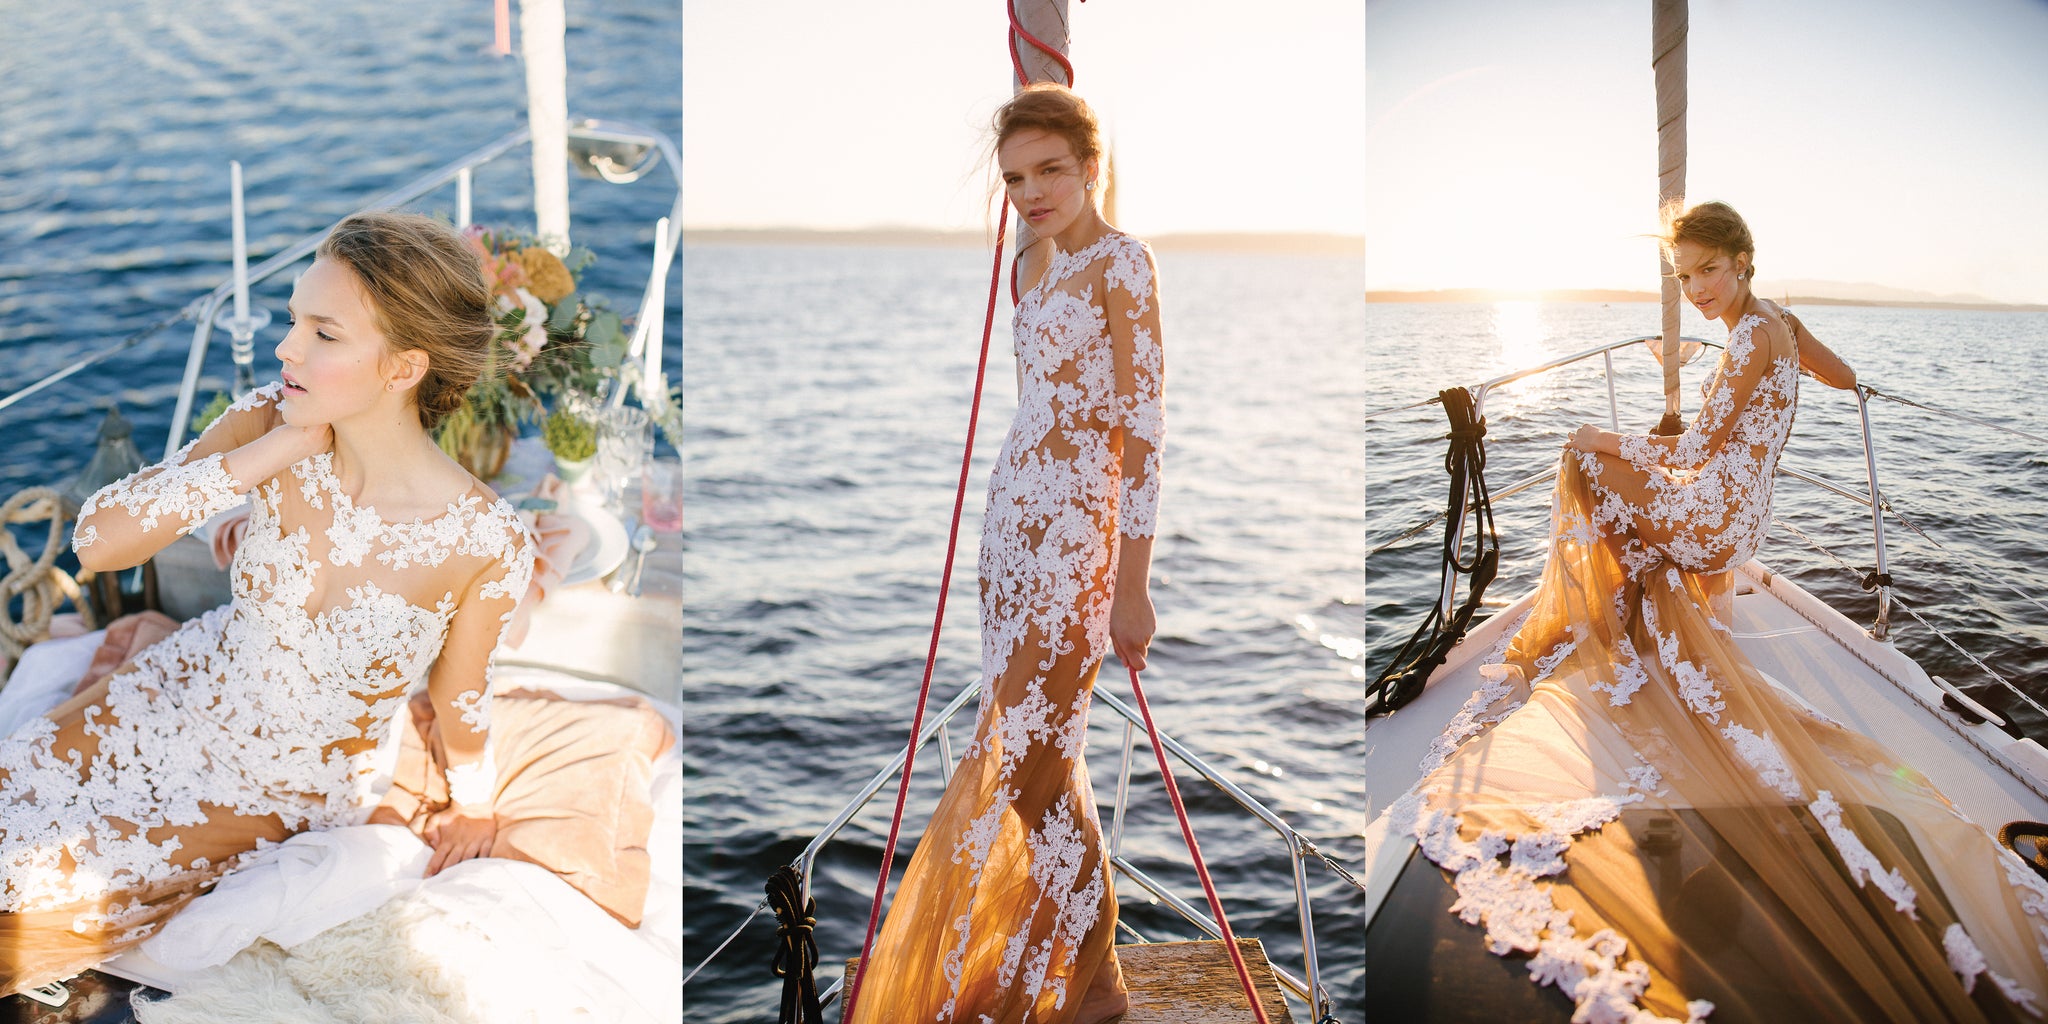 Published on INSIDE WEDDINGS "Be Inspired by a Nautical Wedding Shoot on a Sailboat"